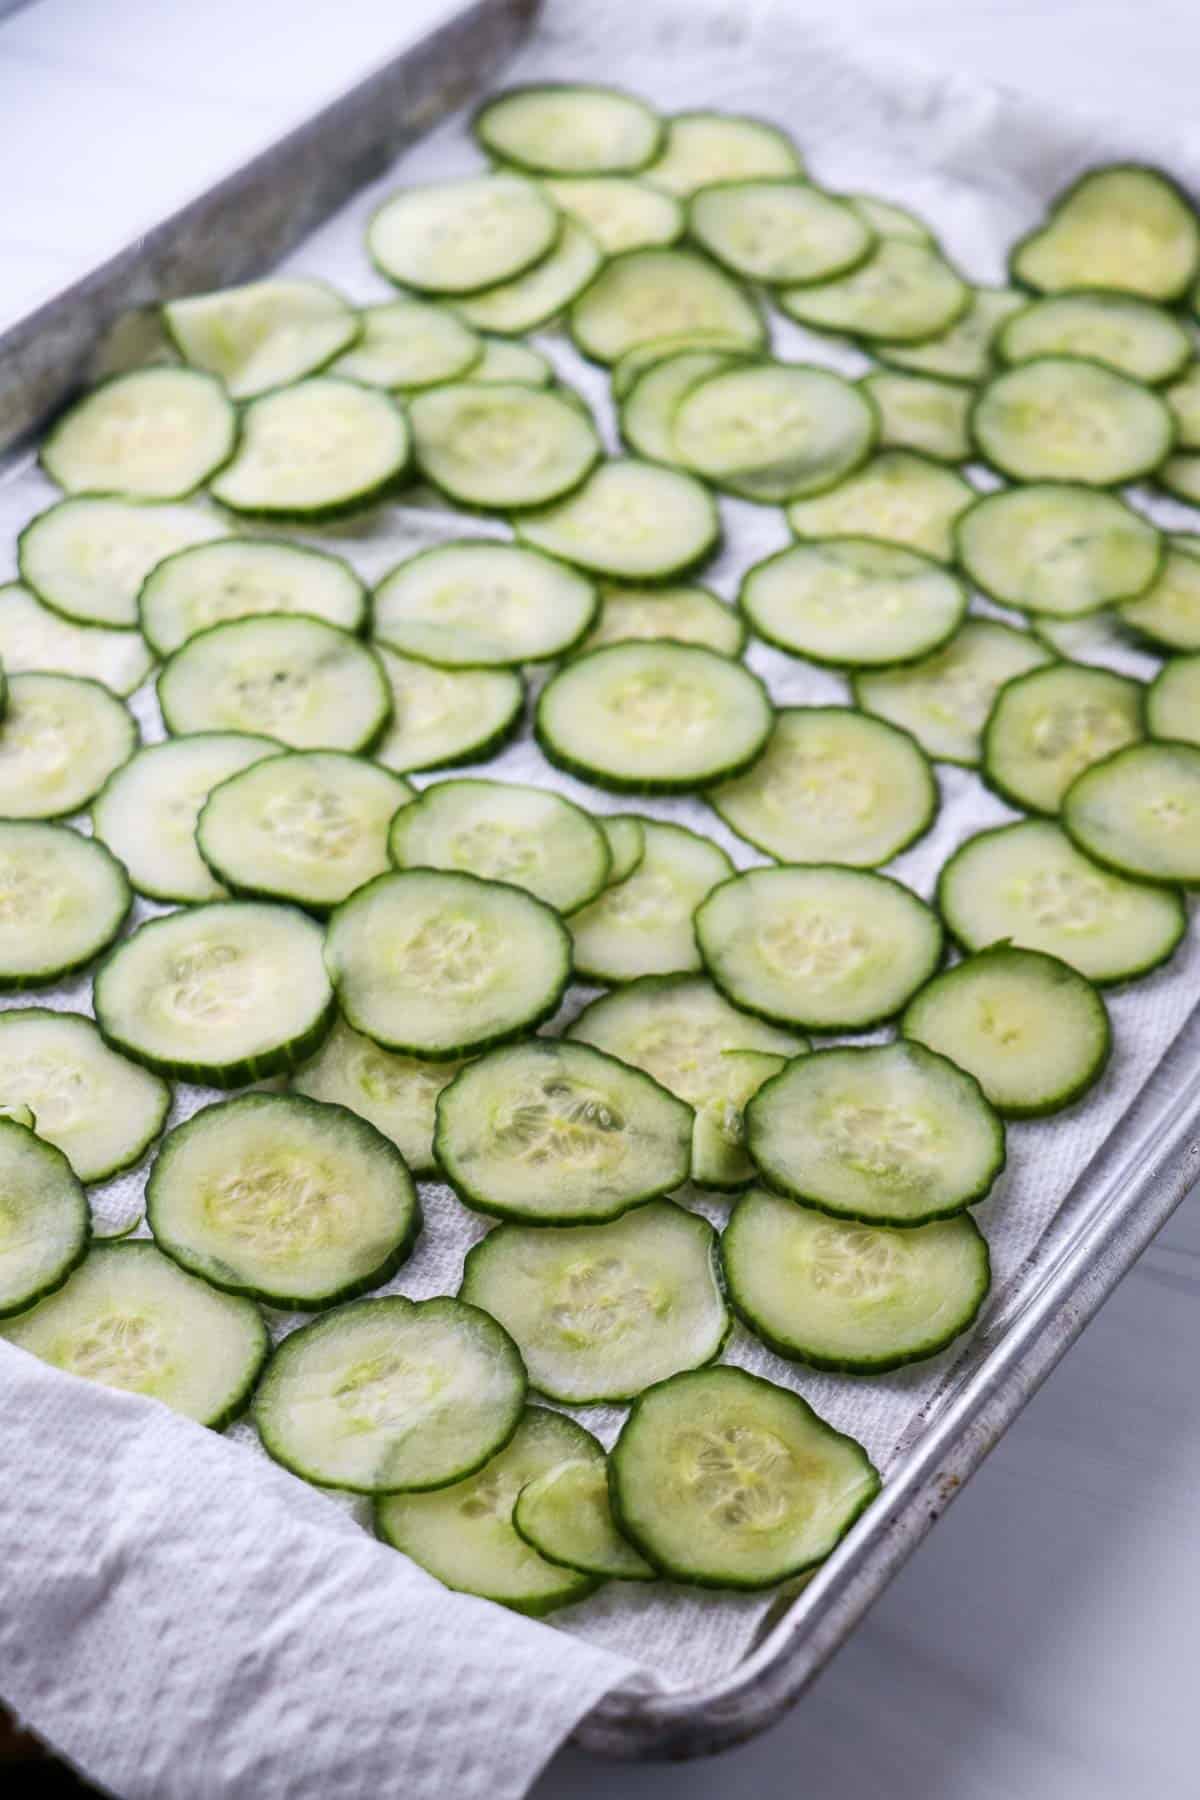 Slices of cucumber on paper towels in a rimmed baking sheet.